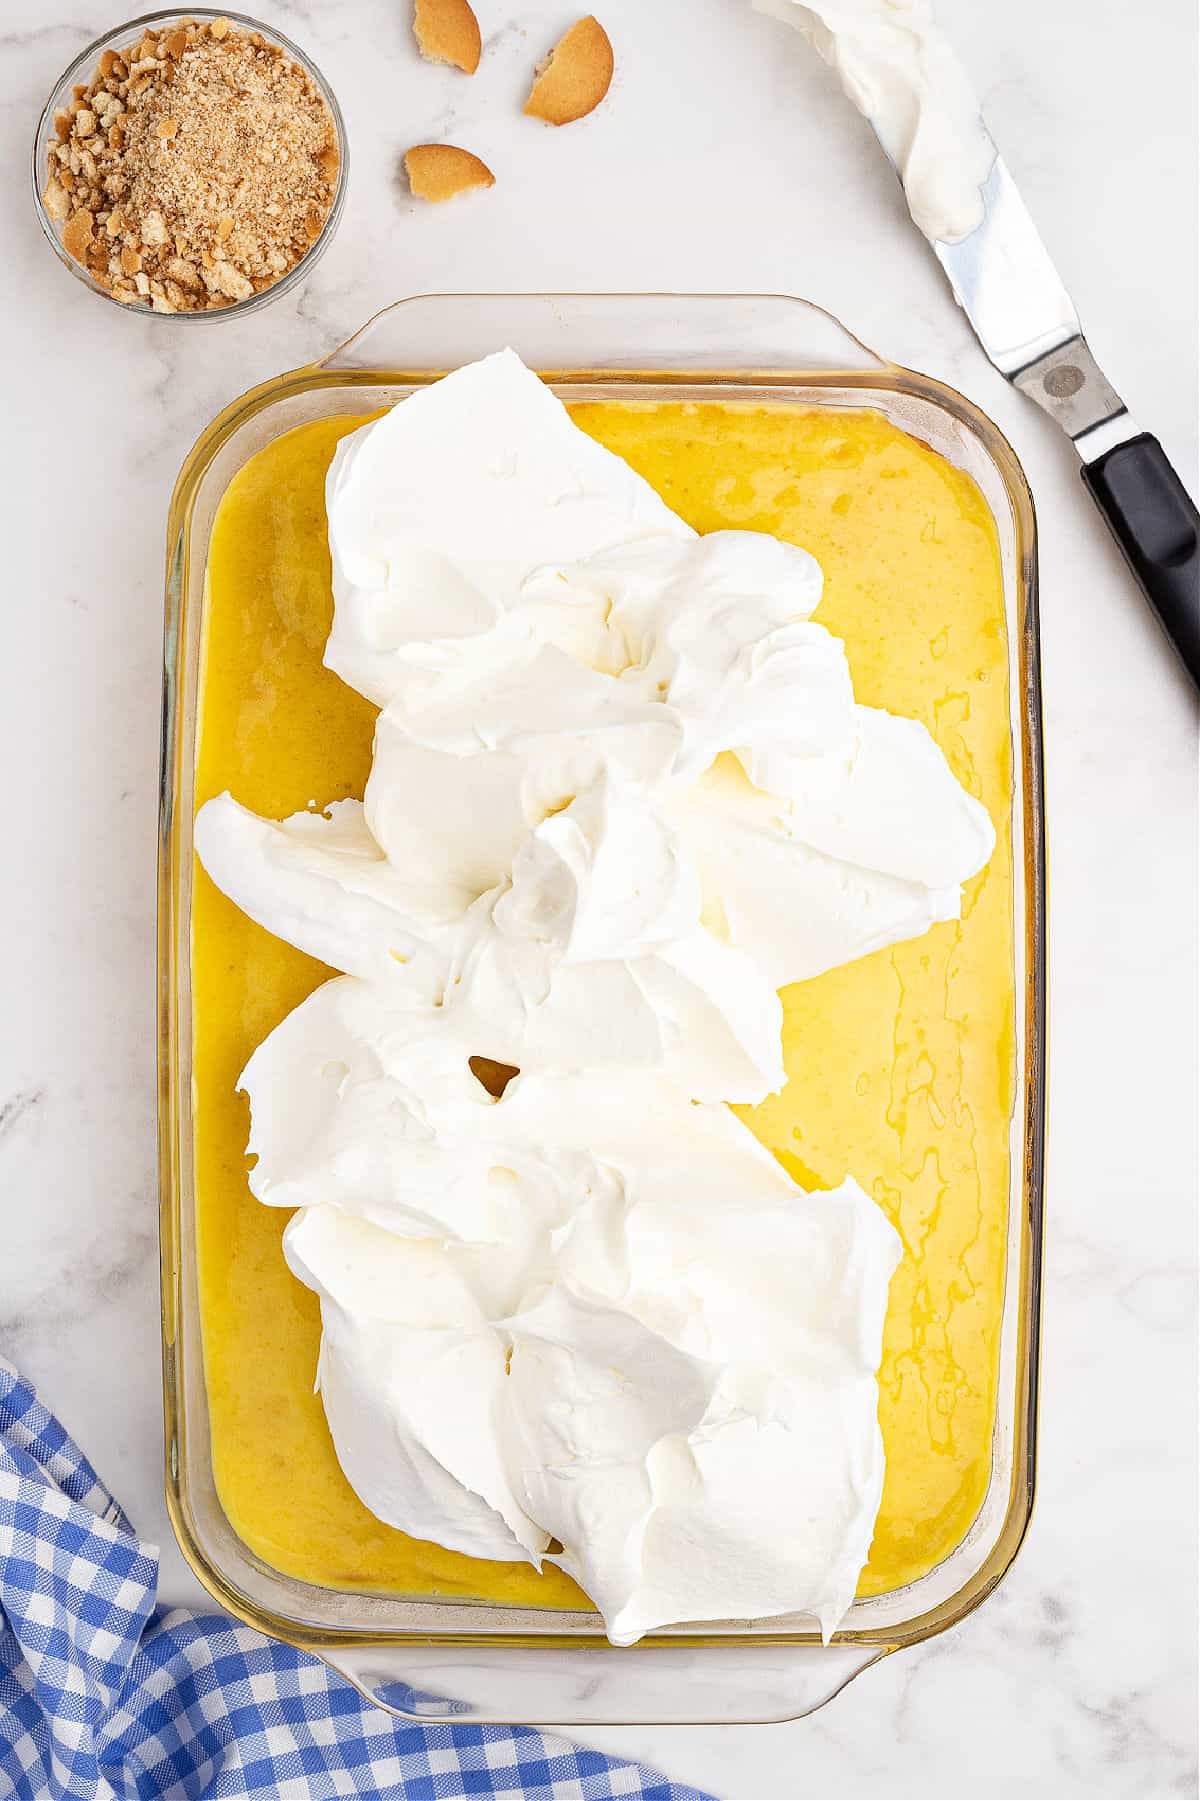 Whipped cream being spread over the top of a lemon poke cake.